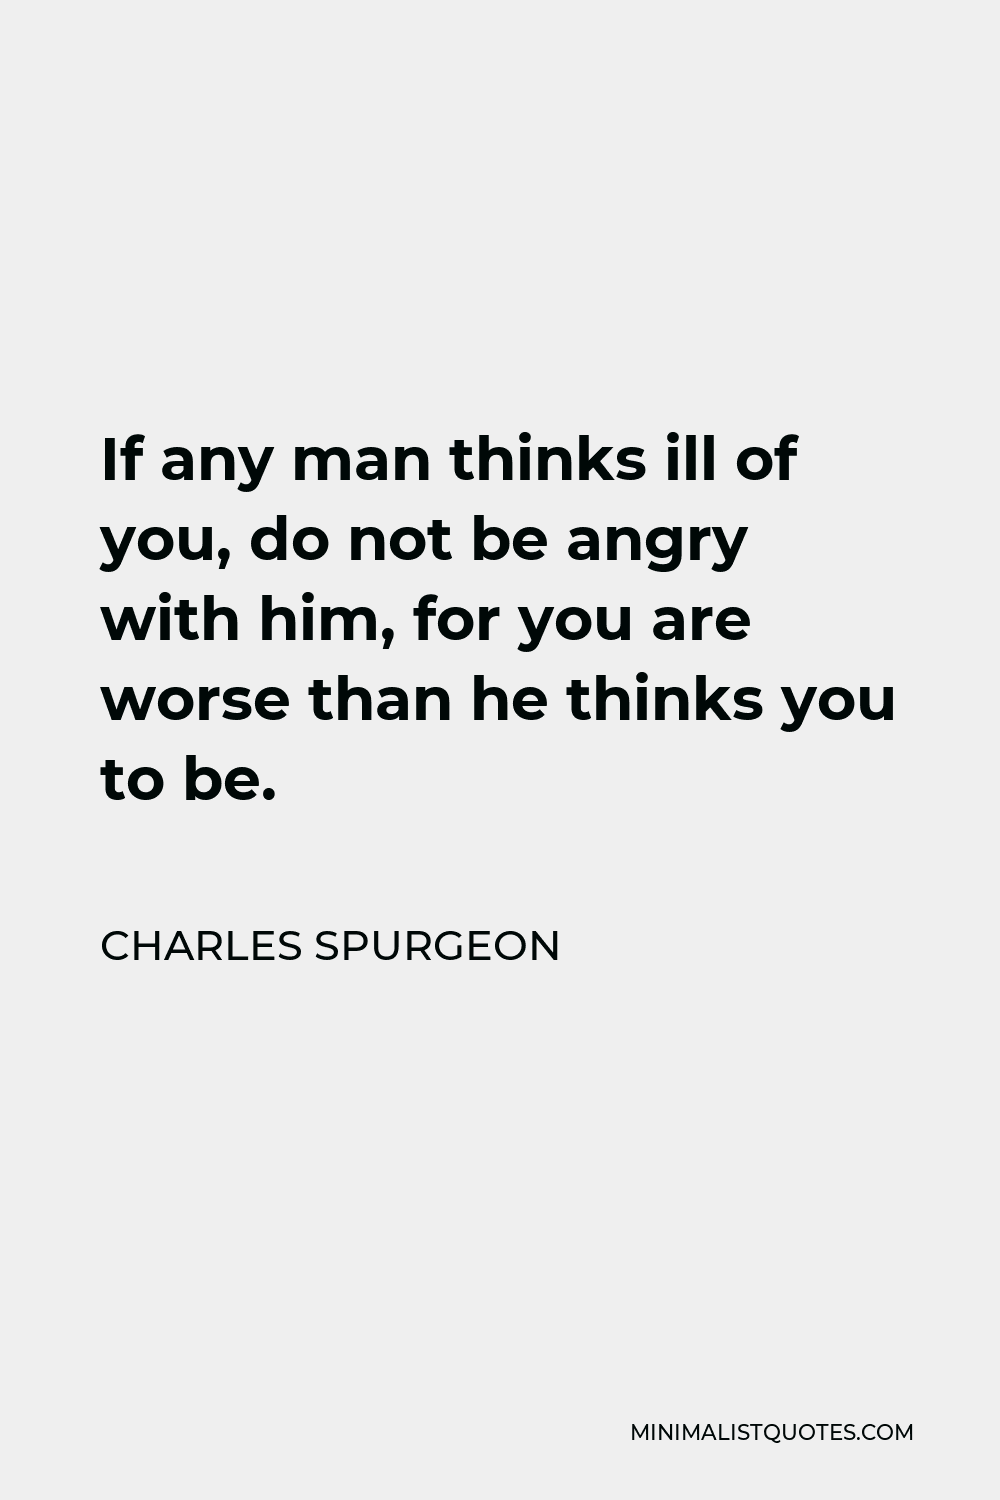 Charles Spurgeon Quote - If any man thinks ill of you, do not be angry with him, for you are worse than he thinks you to be.